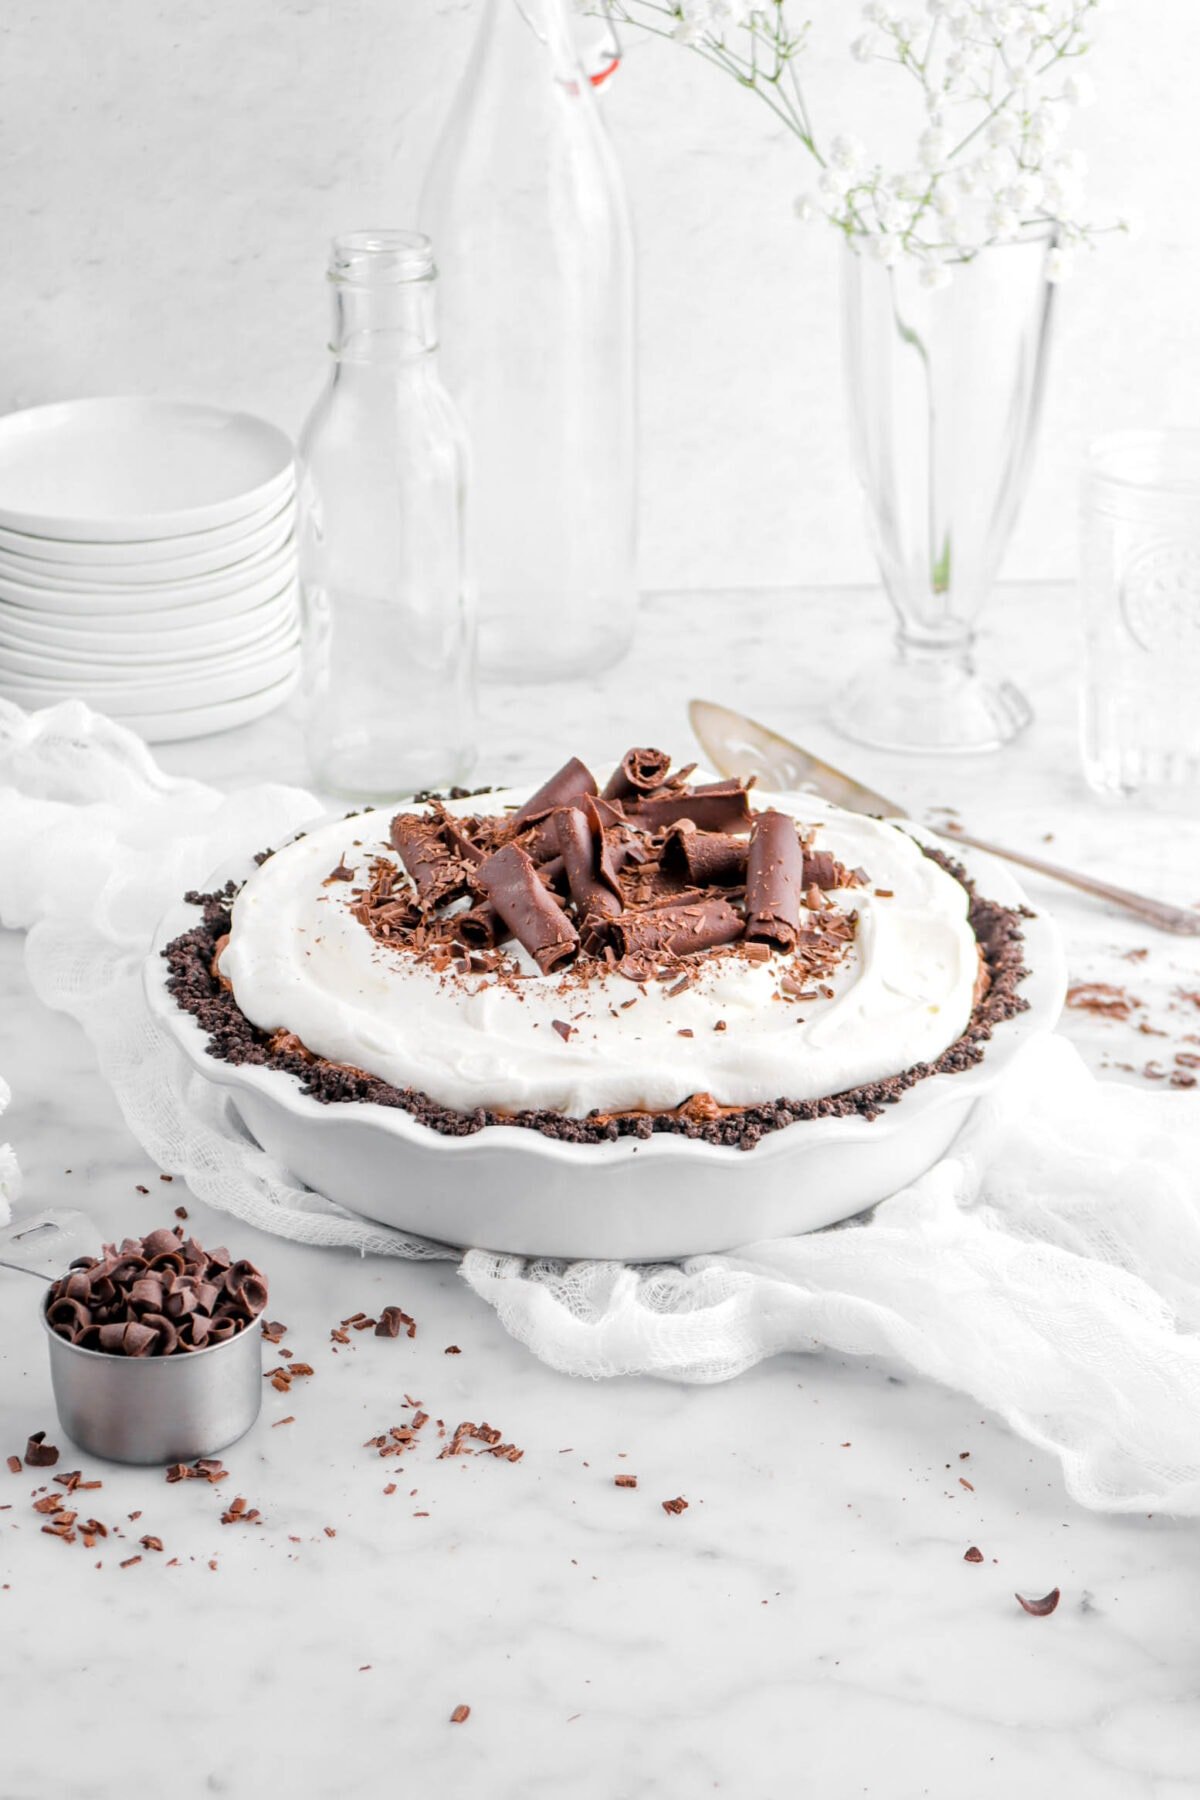 pie on white cheese cloth with large chocolate curls and whipped cream on top, empty glasses, and more chocolate curls around